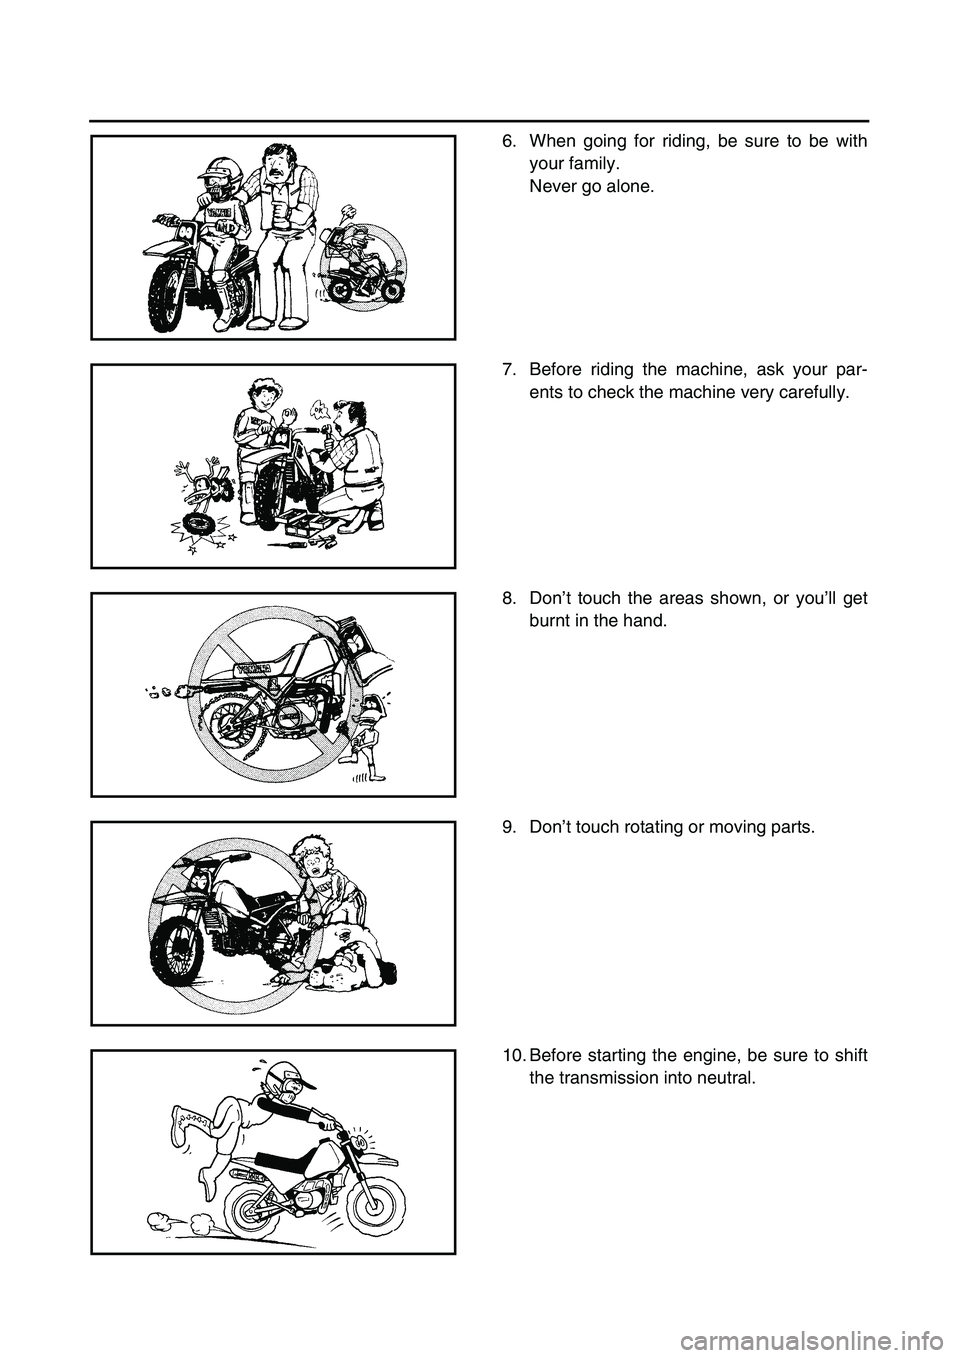 YAMAHA TTR90 2004  Owners Manual  
6. When going for riding, be sure to be with
your family.
Never go alone. 
7. Before riding the machine, ask your par-
ents to check the machine very carefully. 
8. Don’t touch the areas shown, or